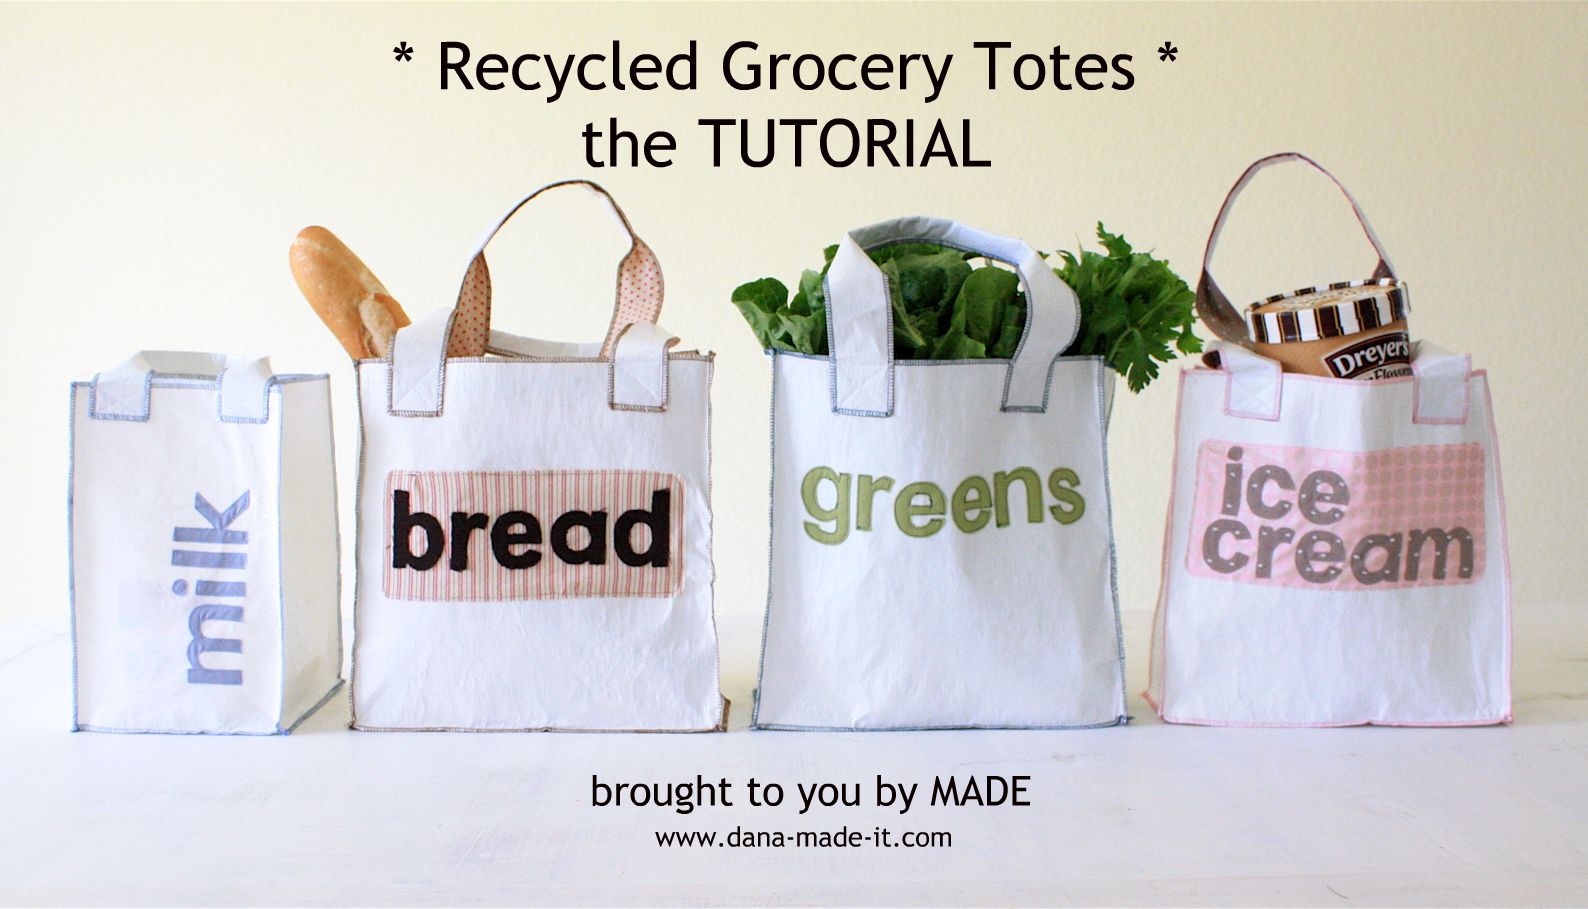 SYTYC: Recycled Grocery Totes